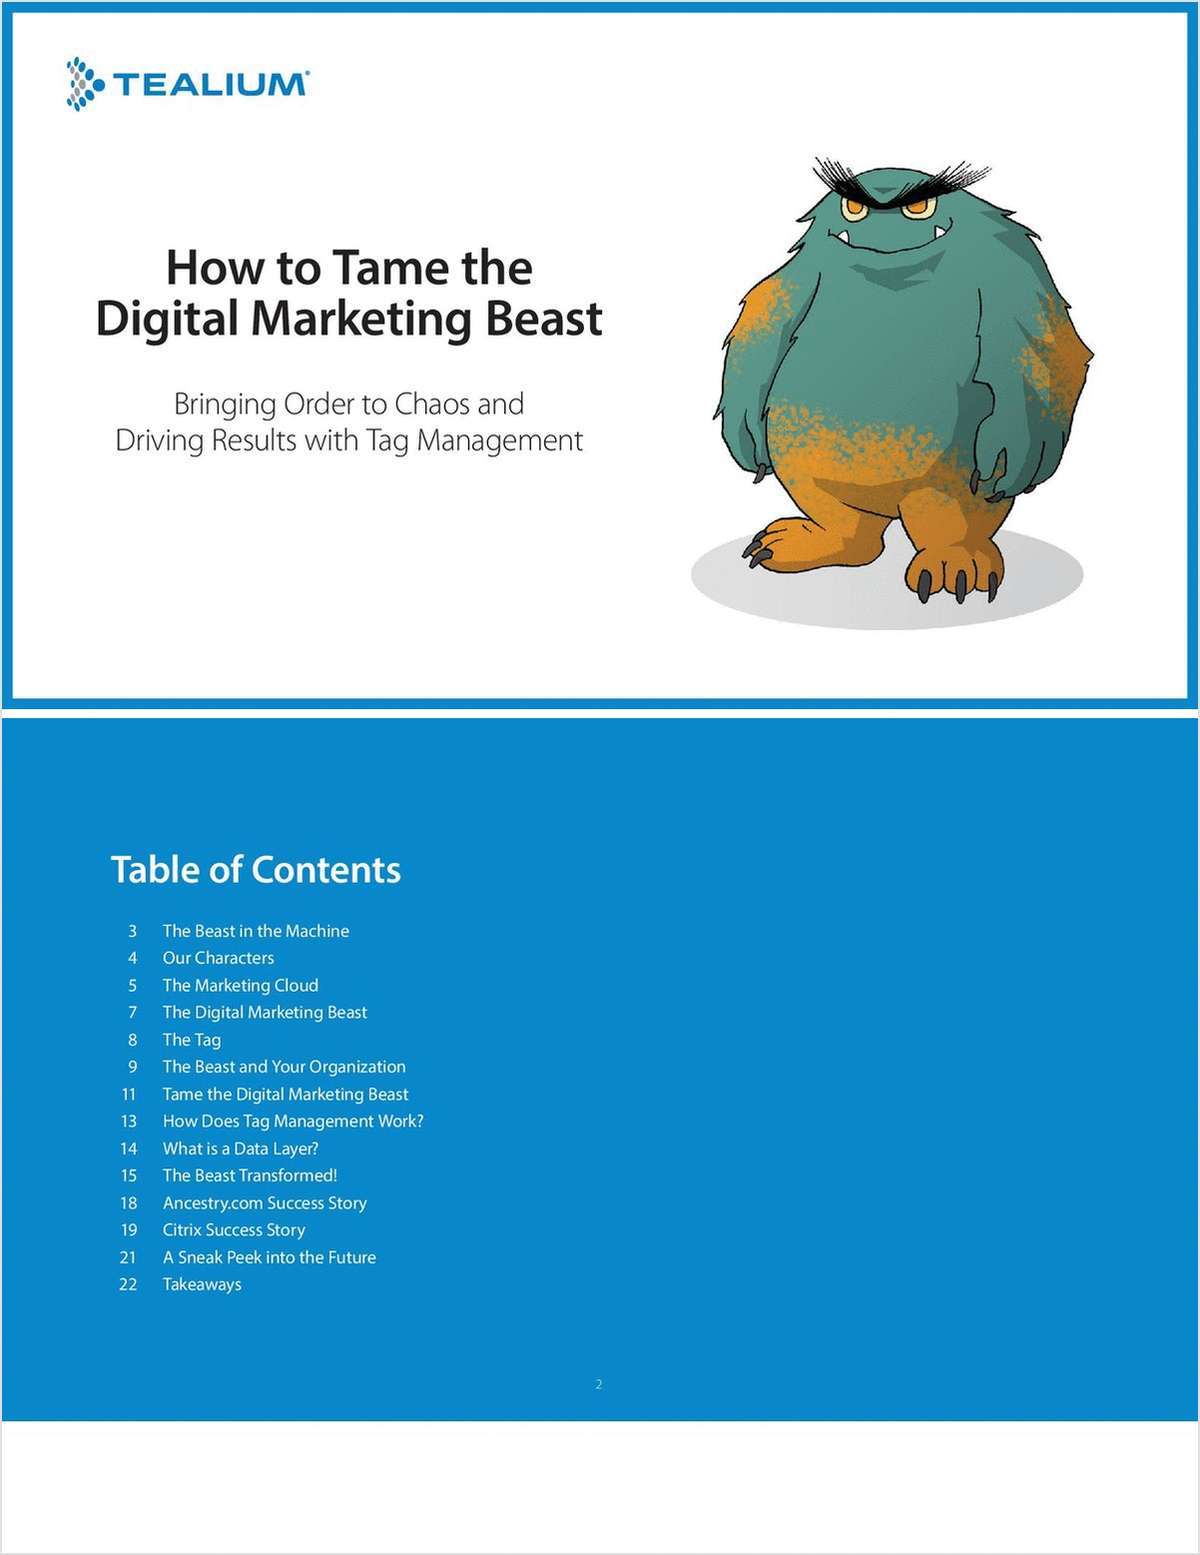 How to Tame the Digital Marketing Beast